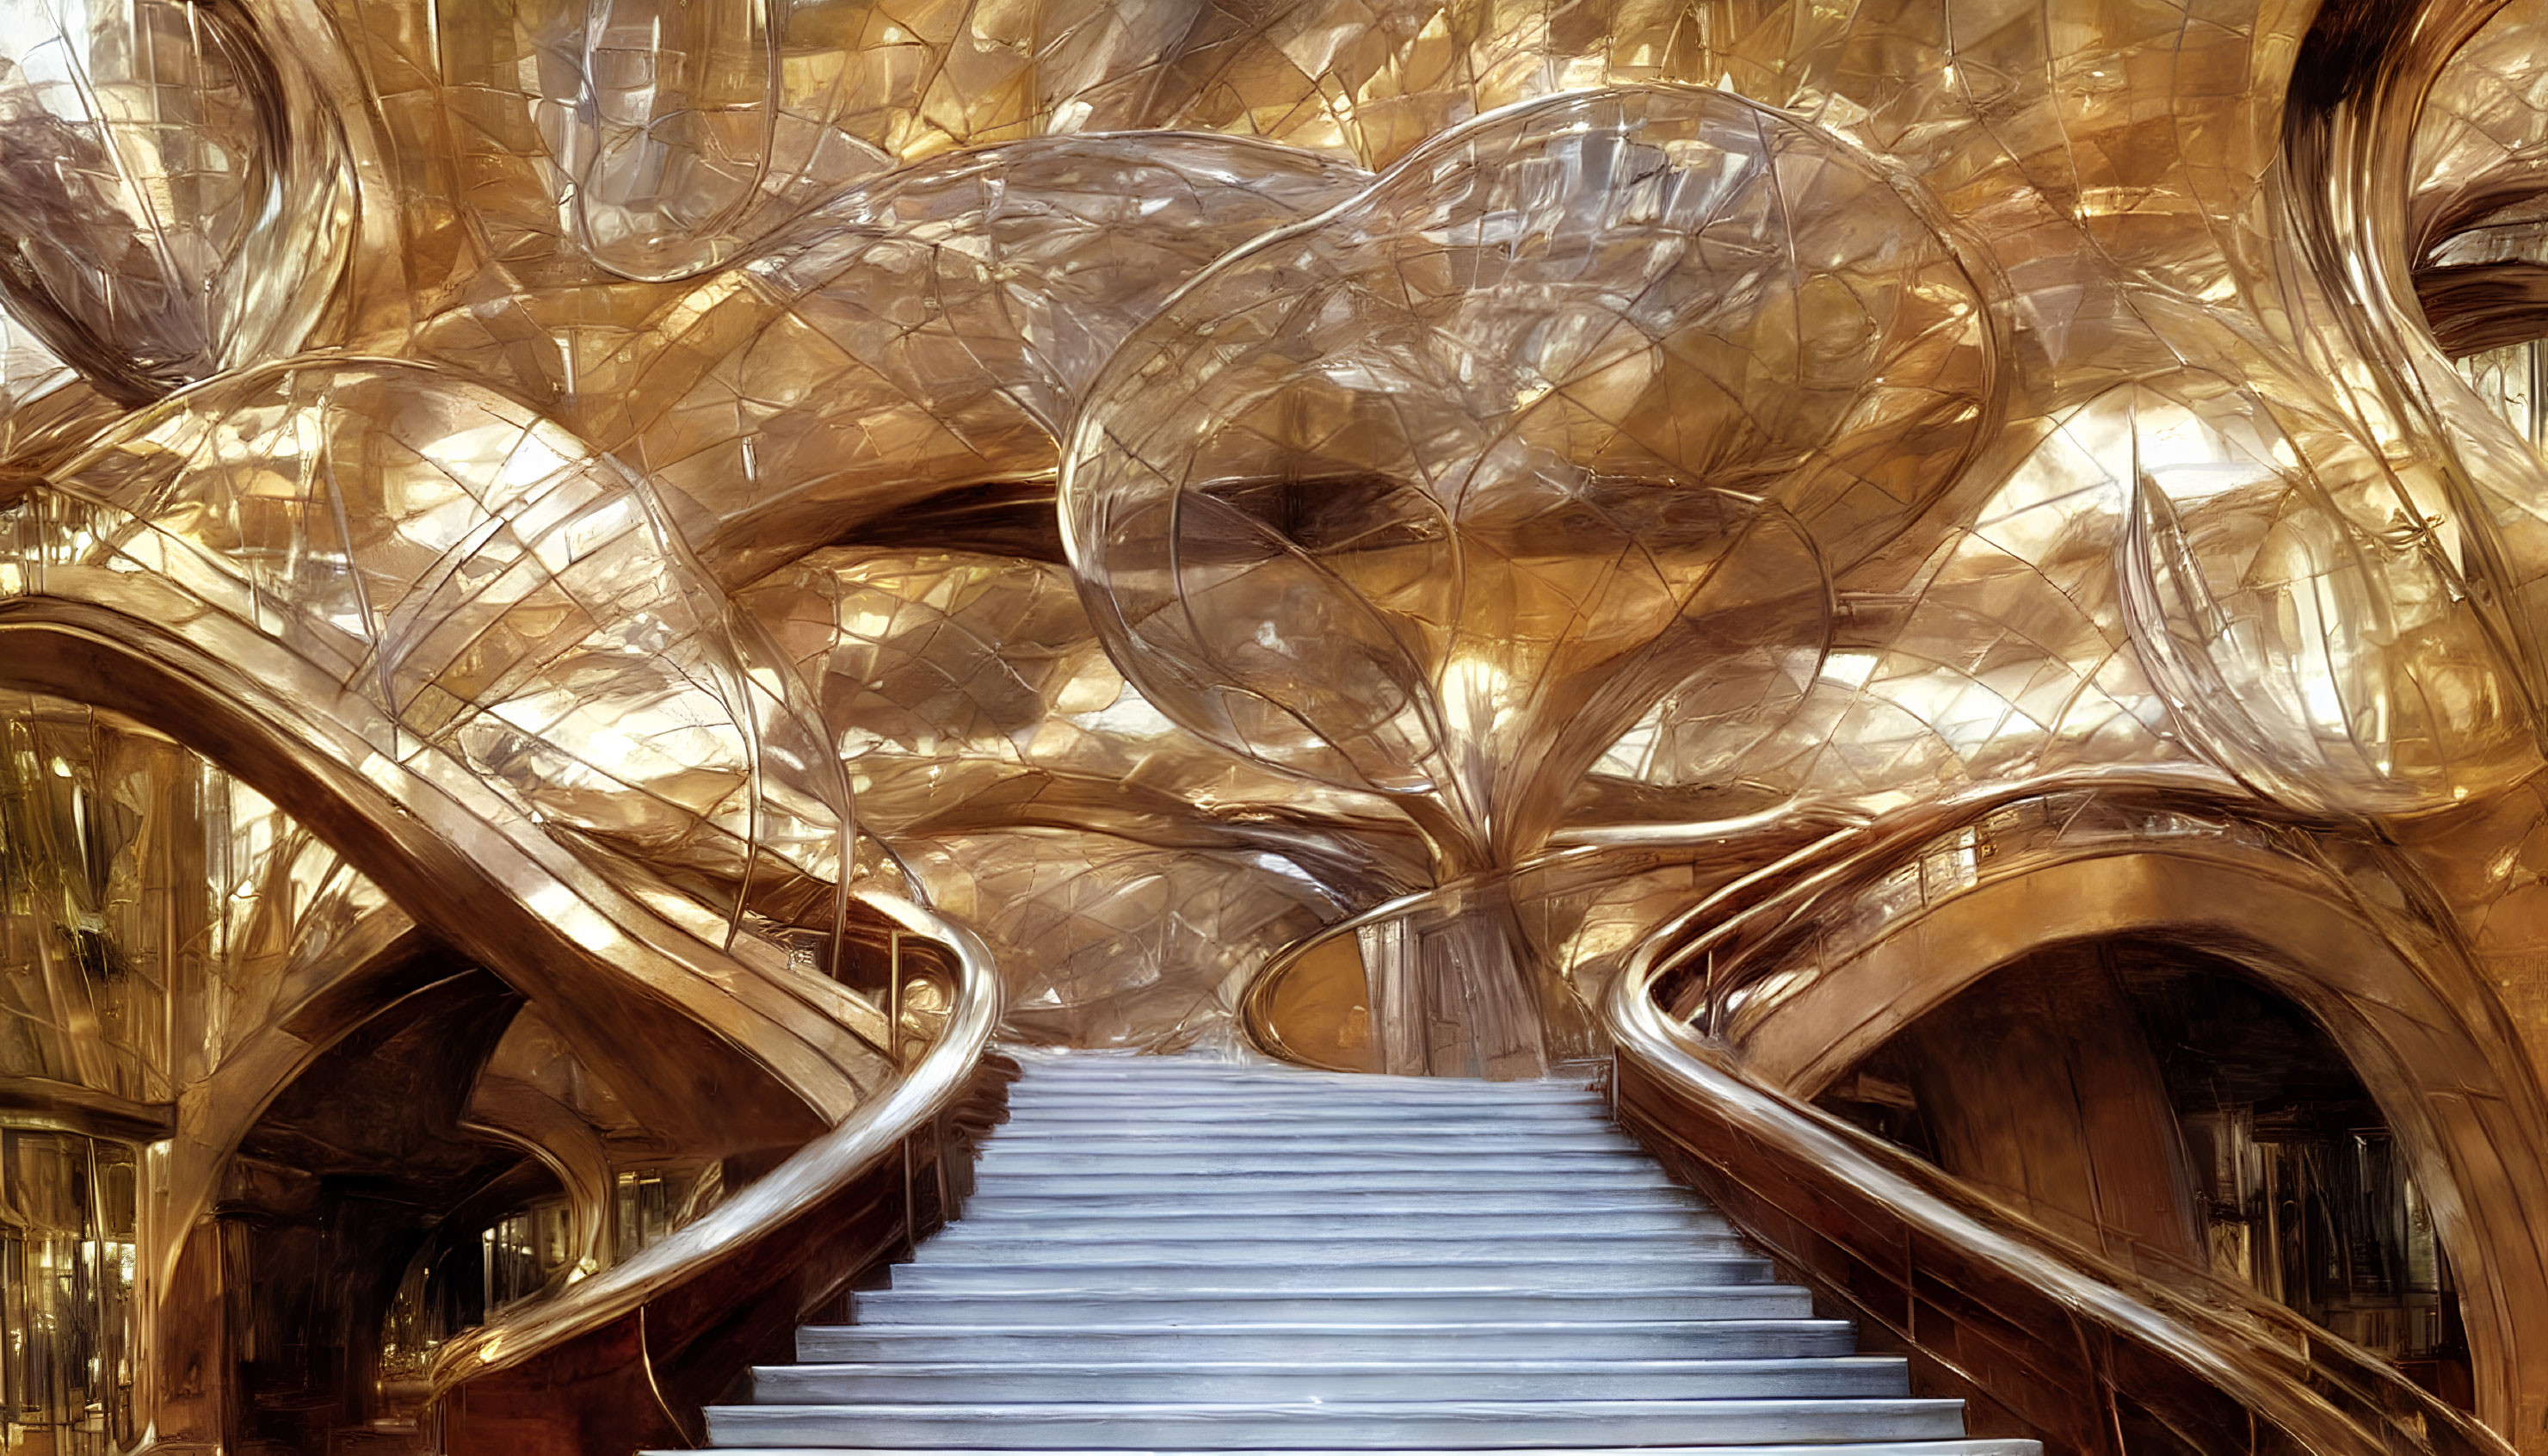 Organic golden tree-like structures in futuristic interior space